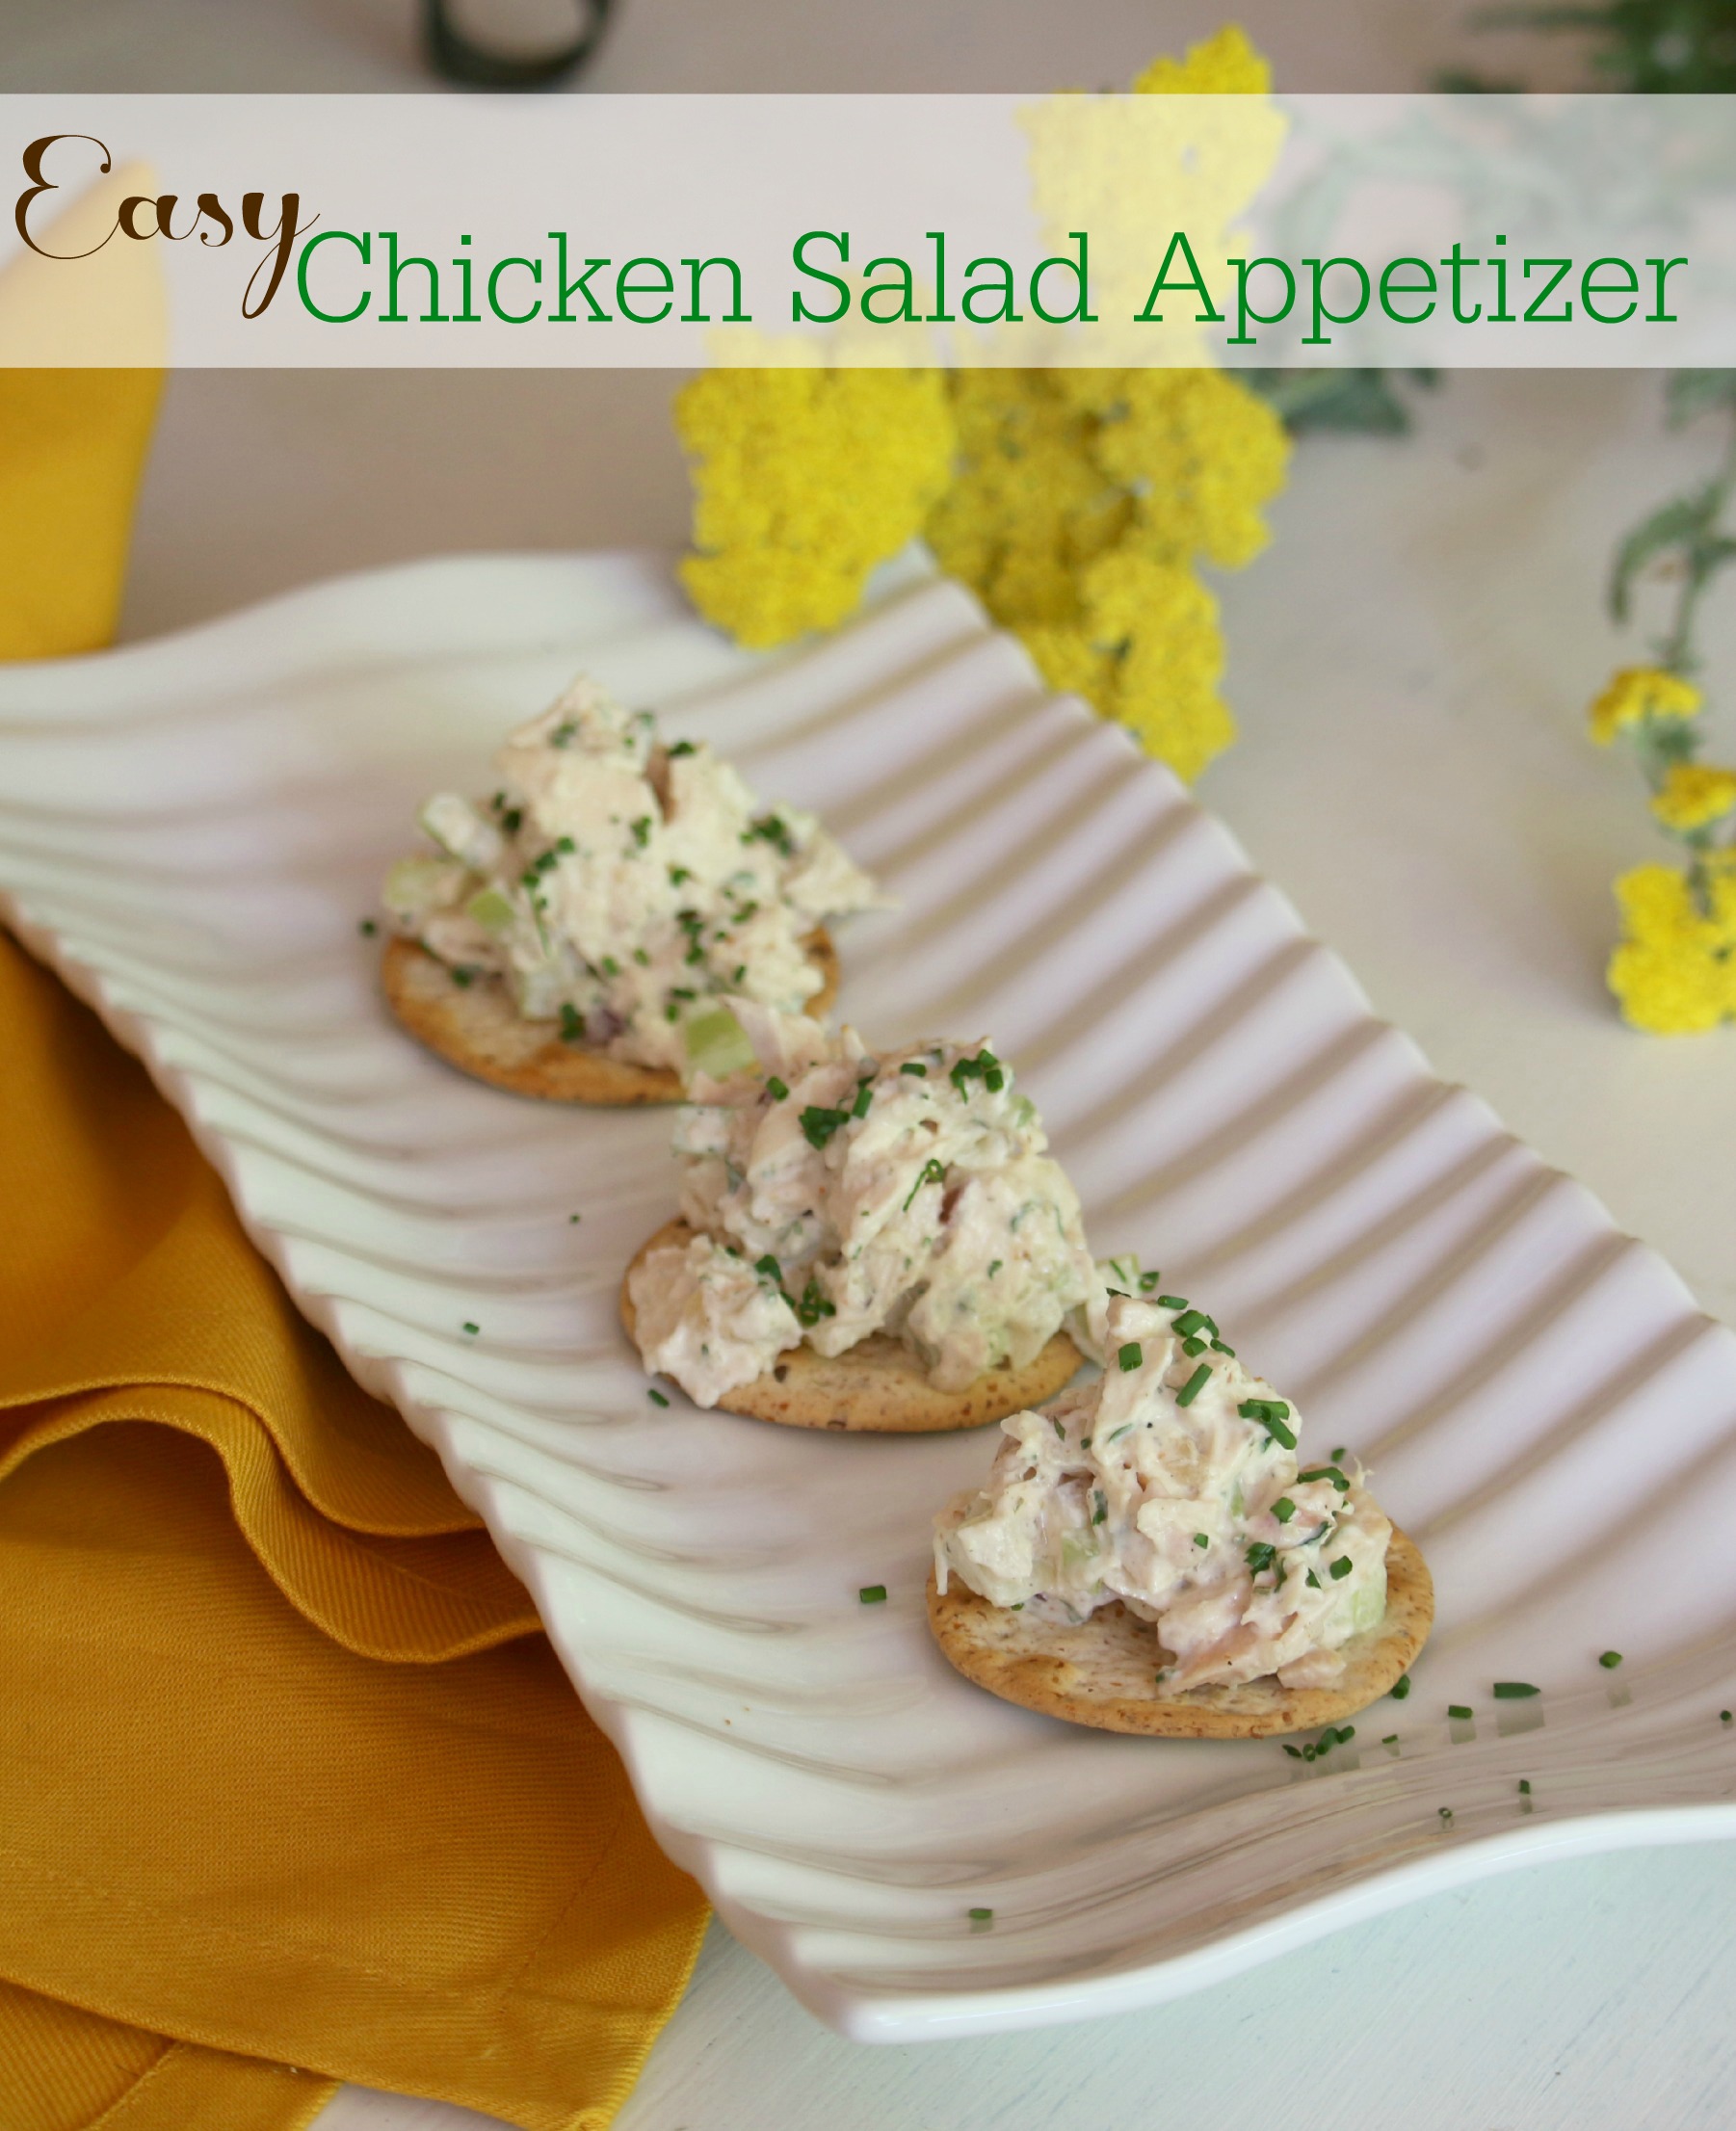 Easy Chicken Salad Appetizer - Great Party Food!